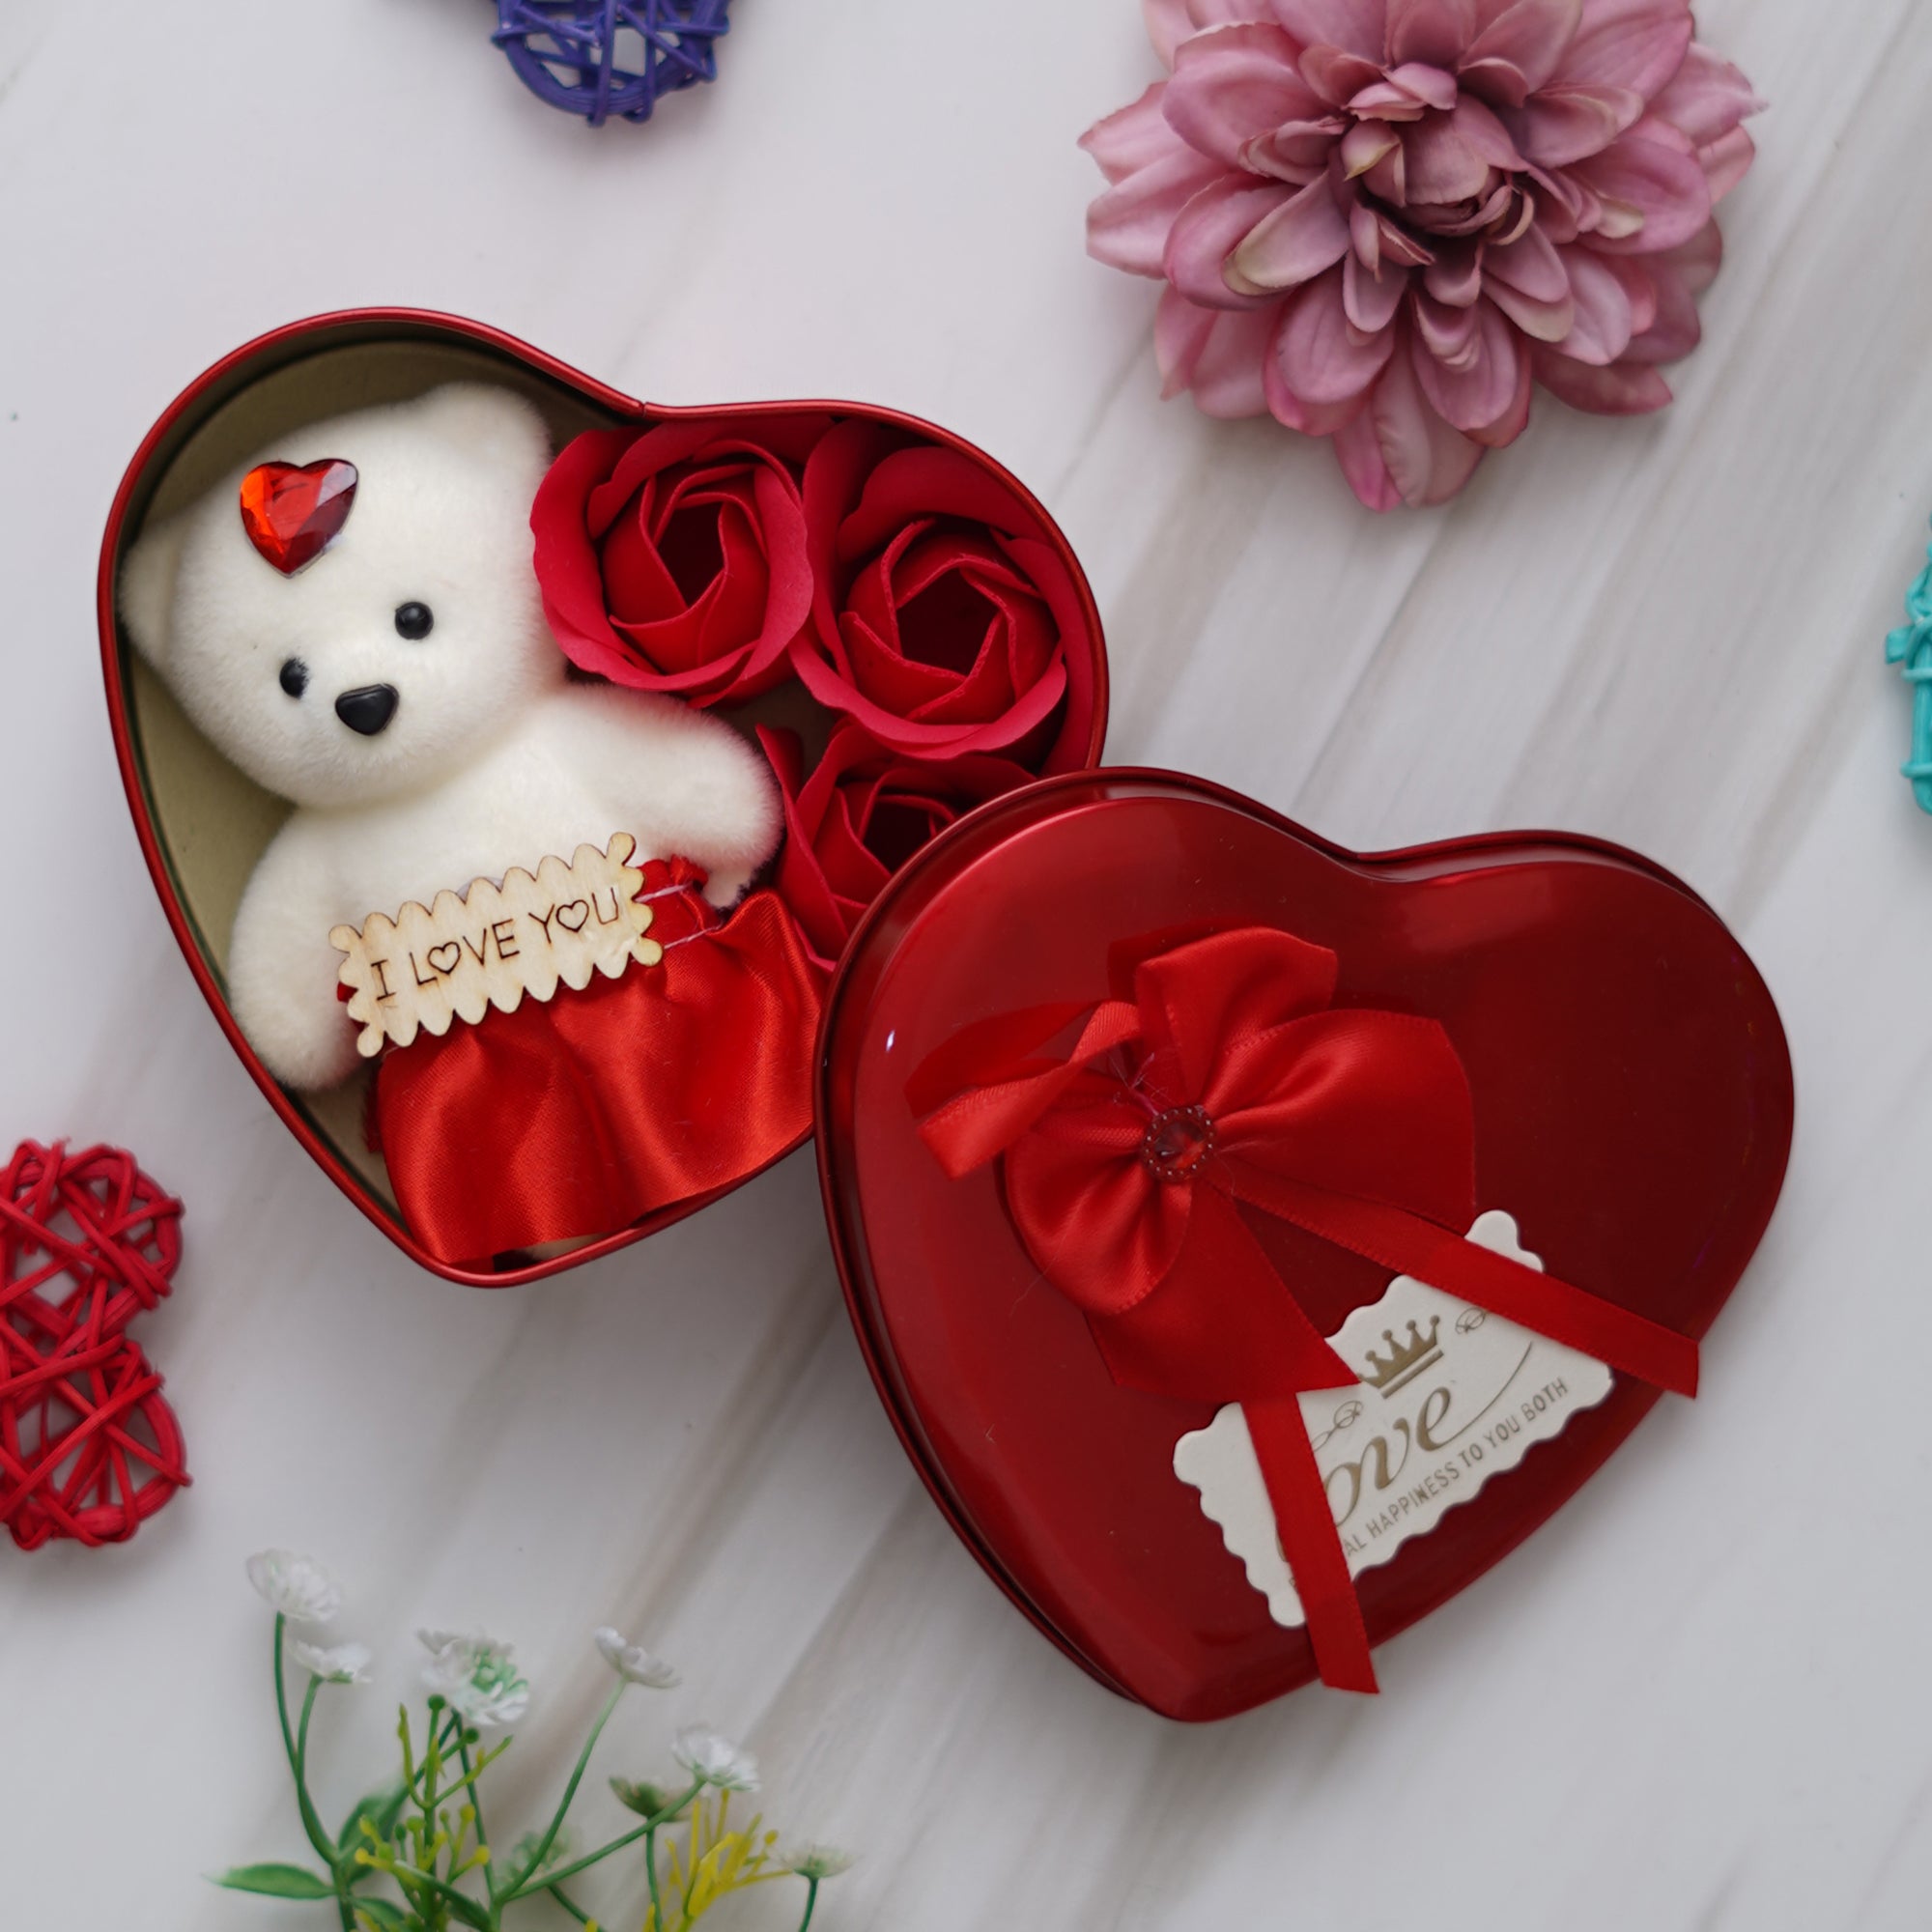 Valentine Combo of Card, Heart Shaped Gift Box Set with White Teddy and Red Roses, Hands Showcasing Red Heart Gift Set 3